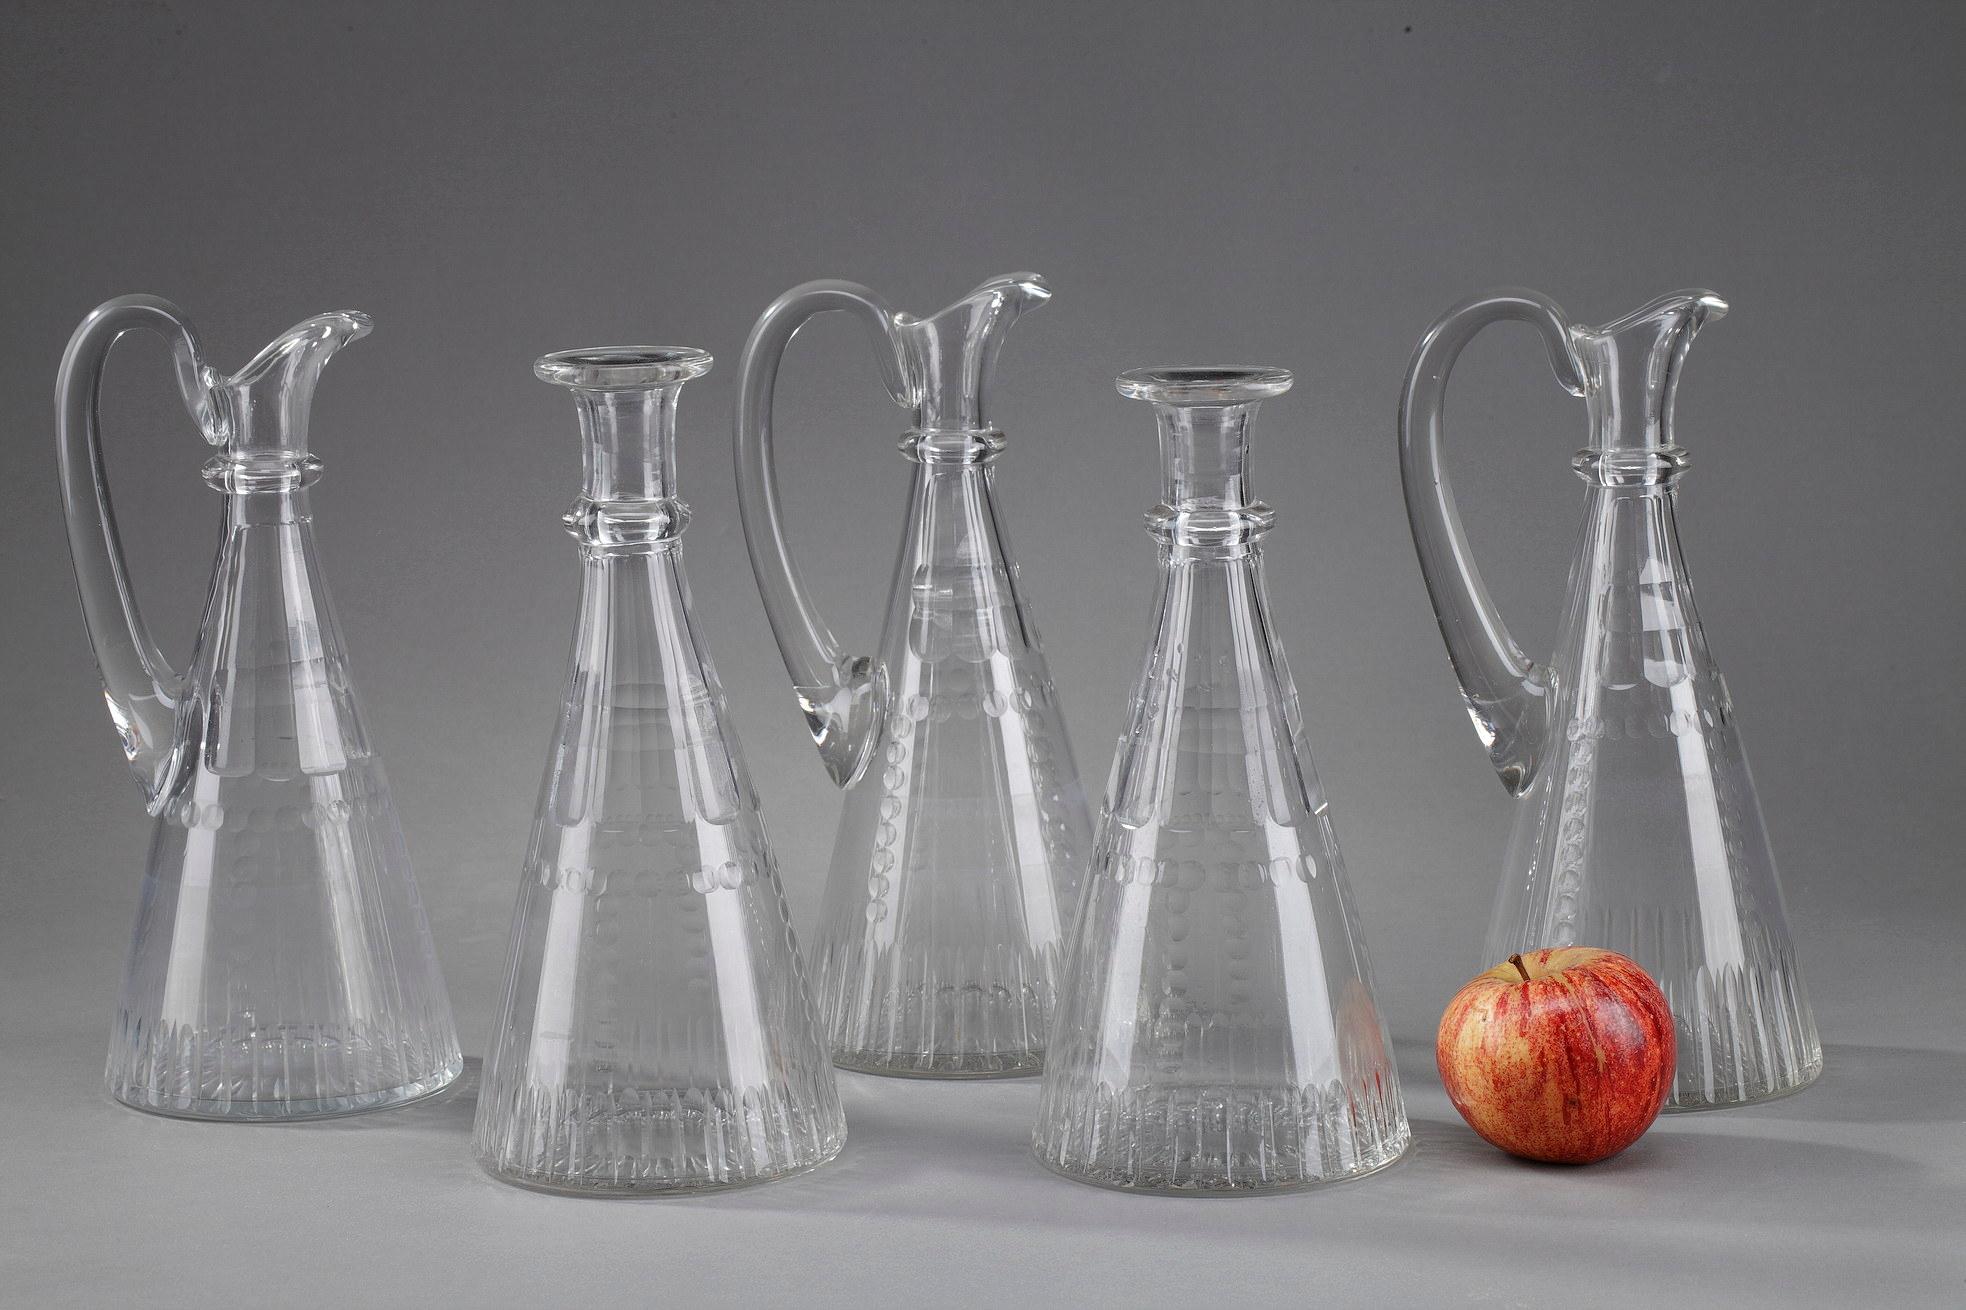 Set of three pitchers and two decanters in molded glass. The pitchers have a high handle that
connects the body and the lip of the containers. They end with a spout. The decanters have a thick
lip. All the glassware available has a unified